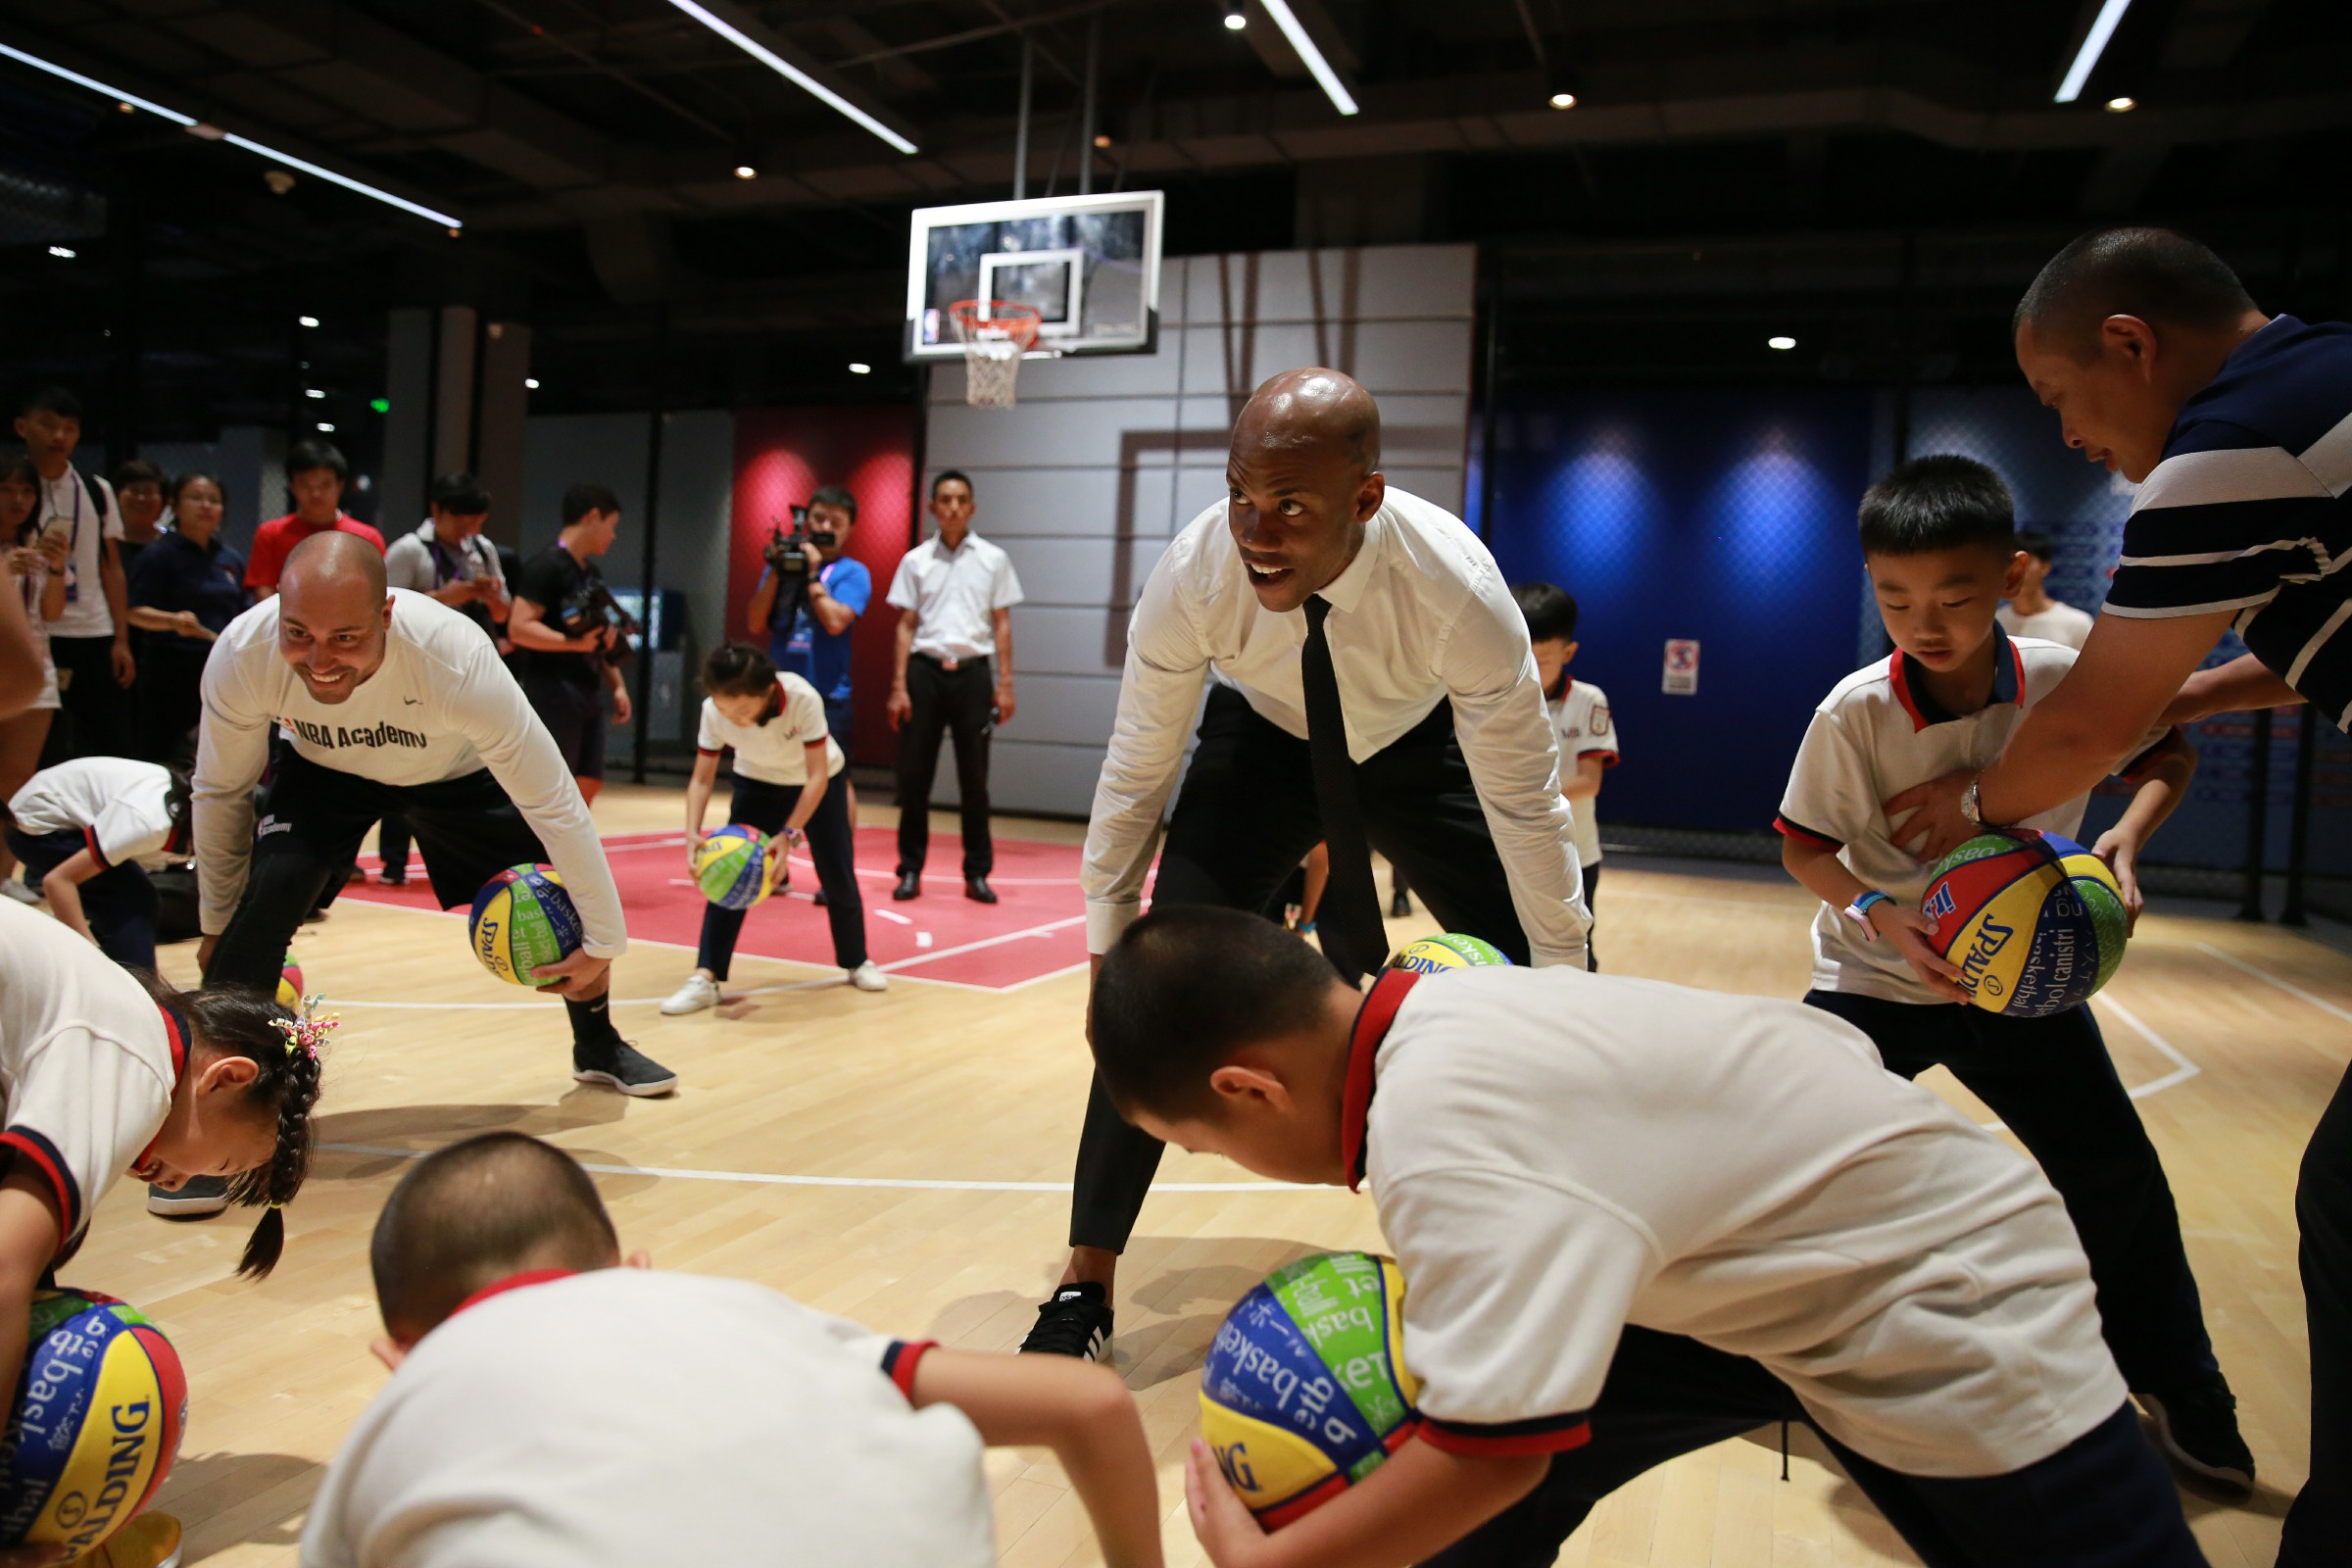 Photo 4 – NBA and CBA basketball legend Stephon Marbury hosts a clinic for children at the opening of the NBA Exhibit at Mission Hills Haikou in Hainan, China